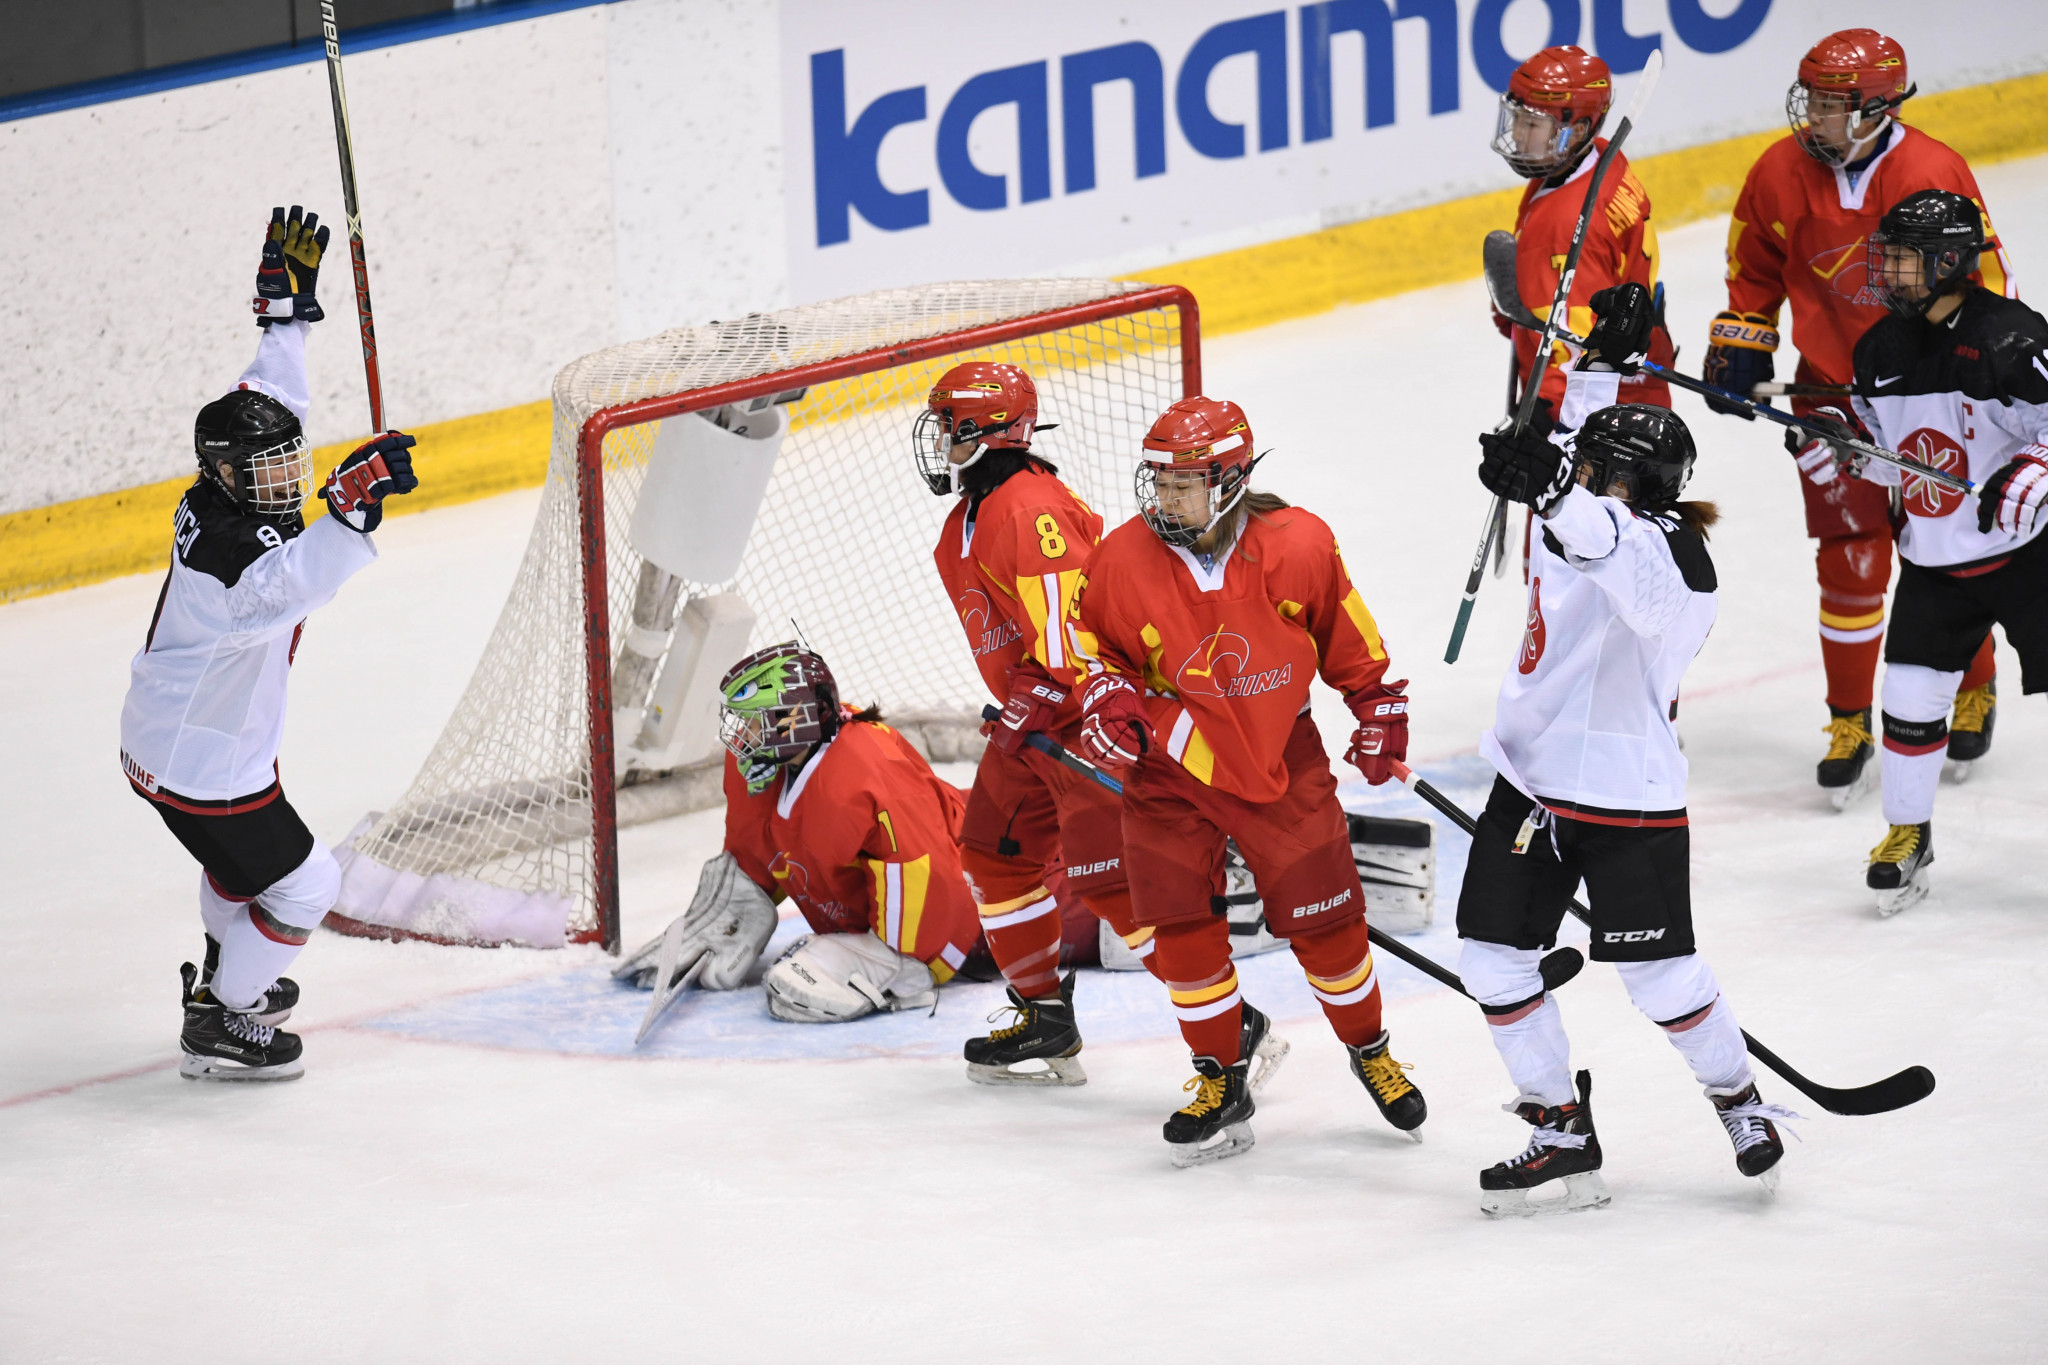 Concerns have been raised that China are not currently good enough to compete in ice hockey at the Beijing 2022 Winter Olympic Games ©Getty Images